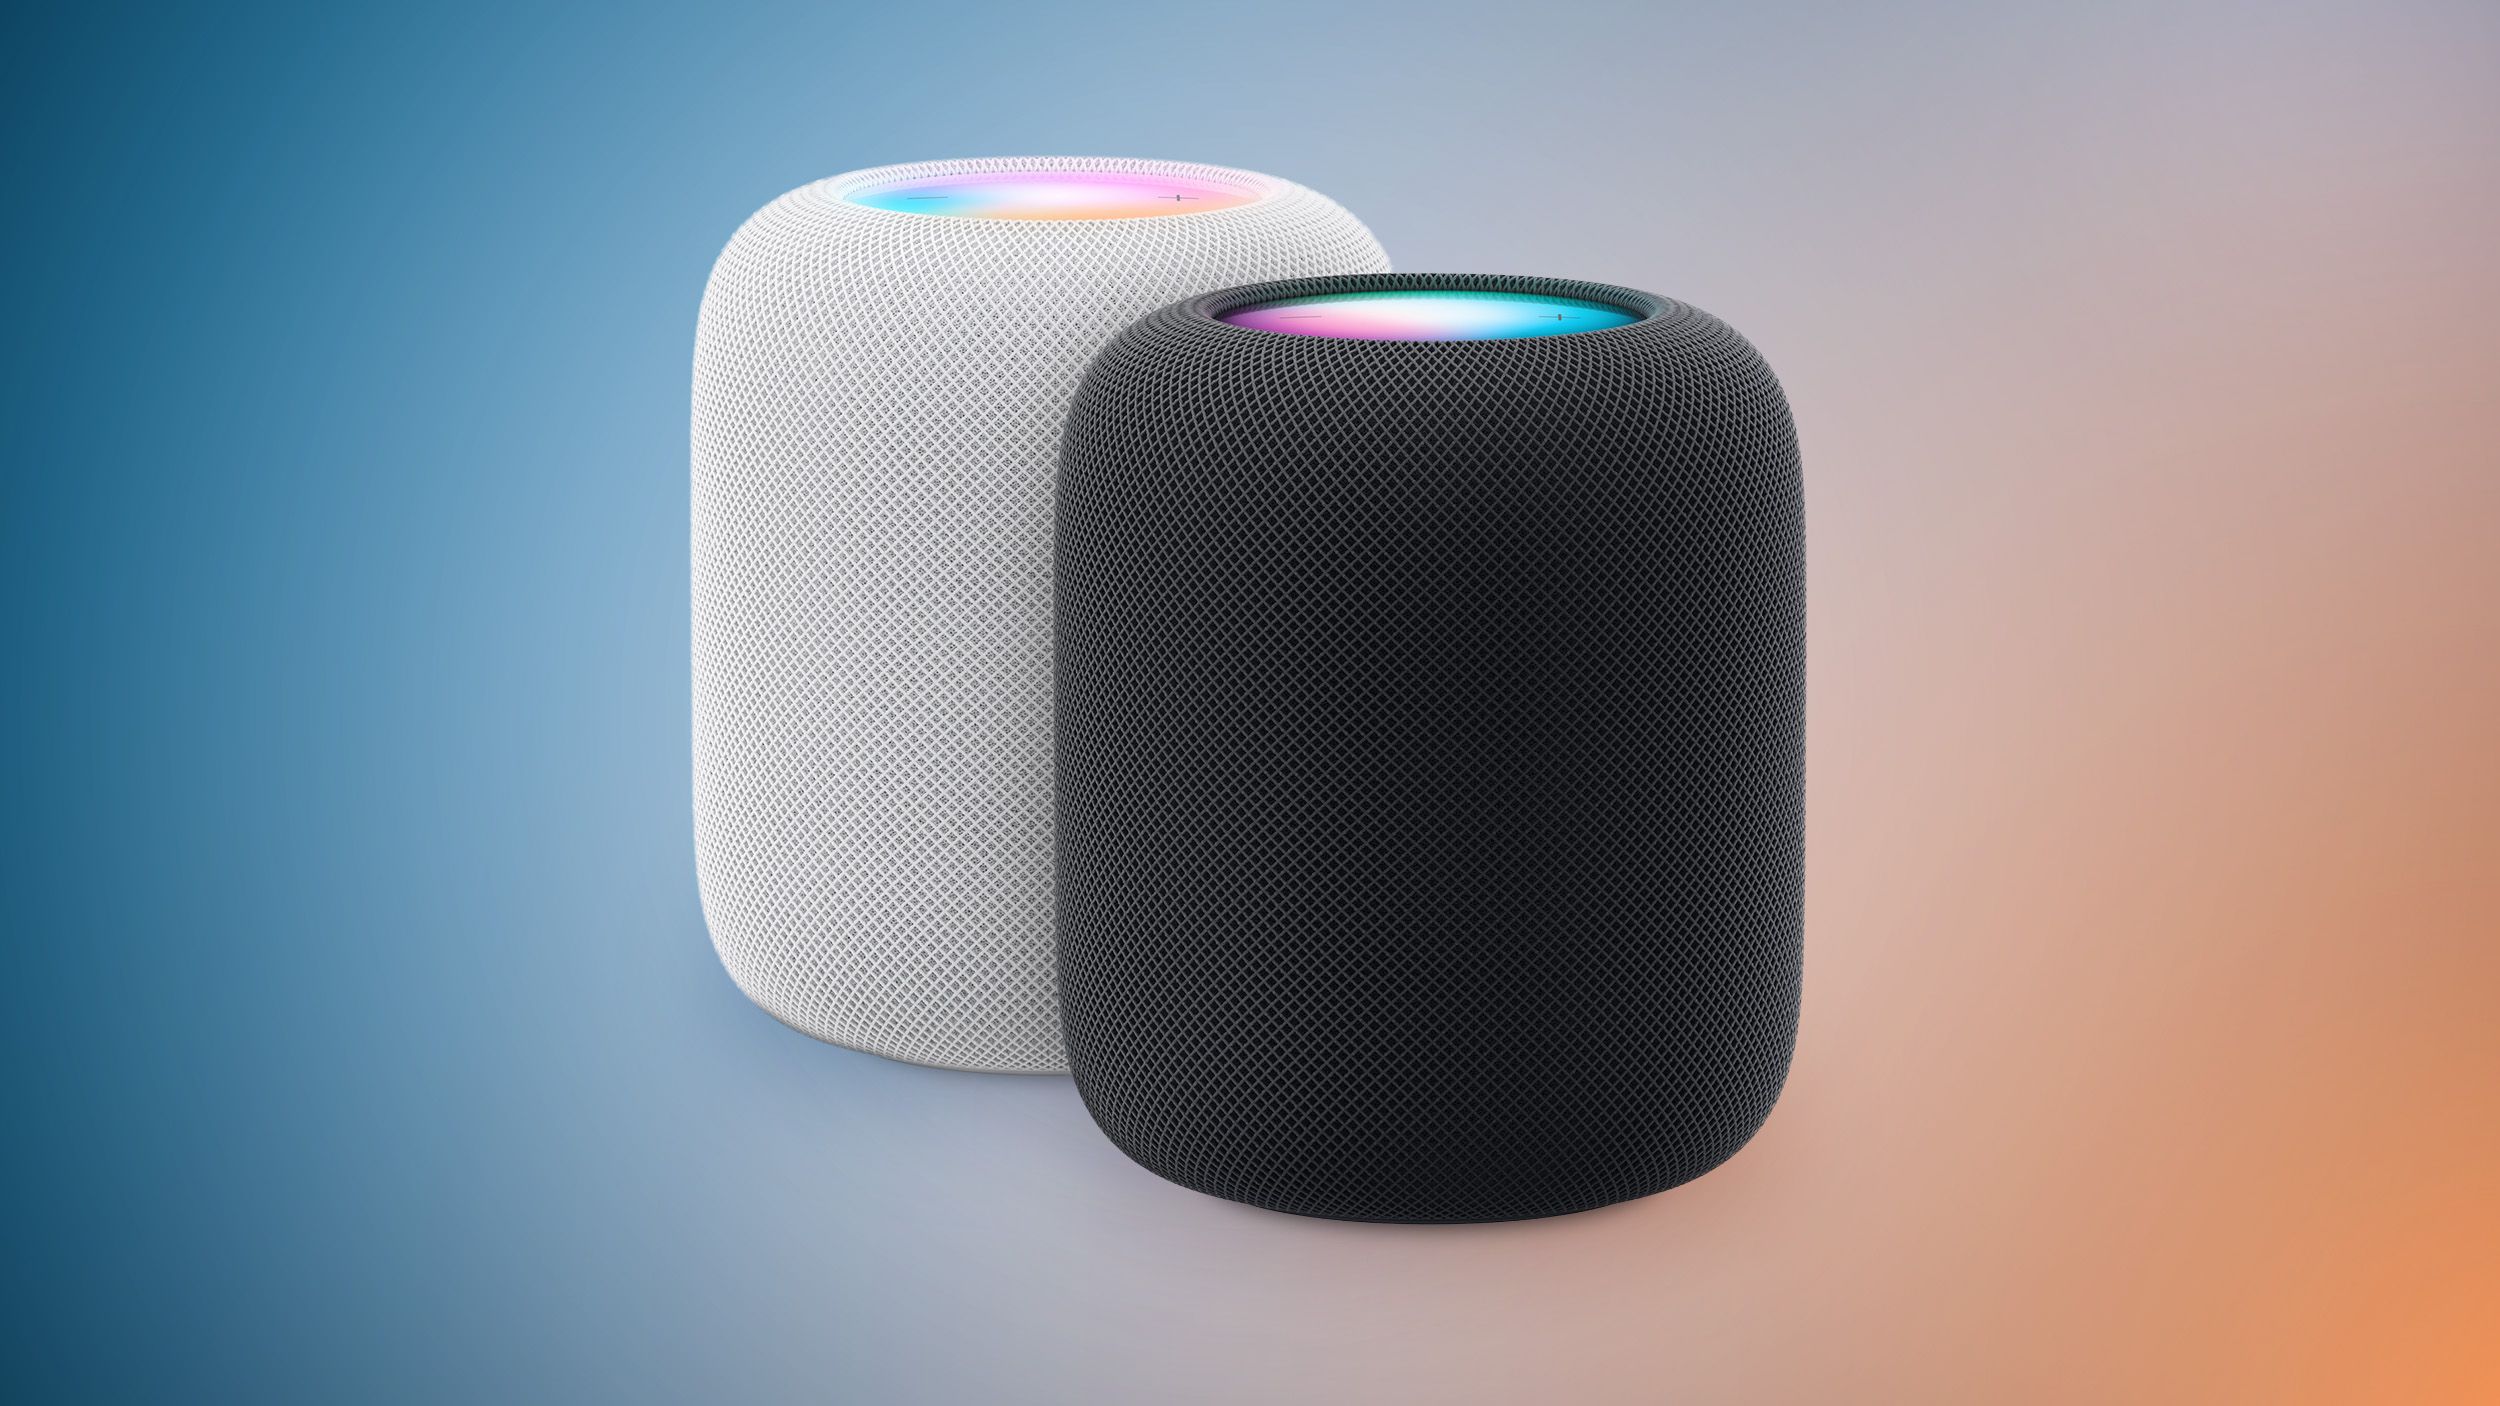 Apple Reintroduced the HomePod a Year Ago Today